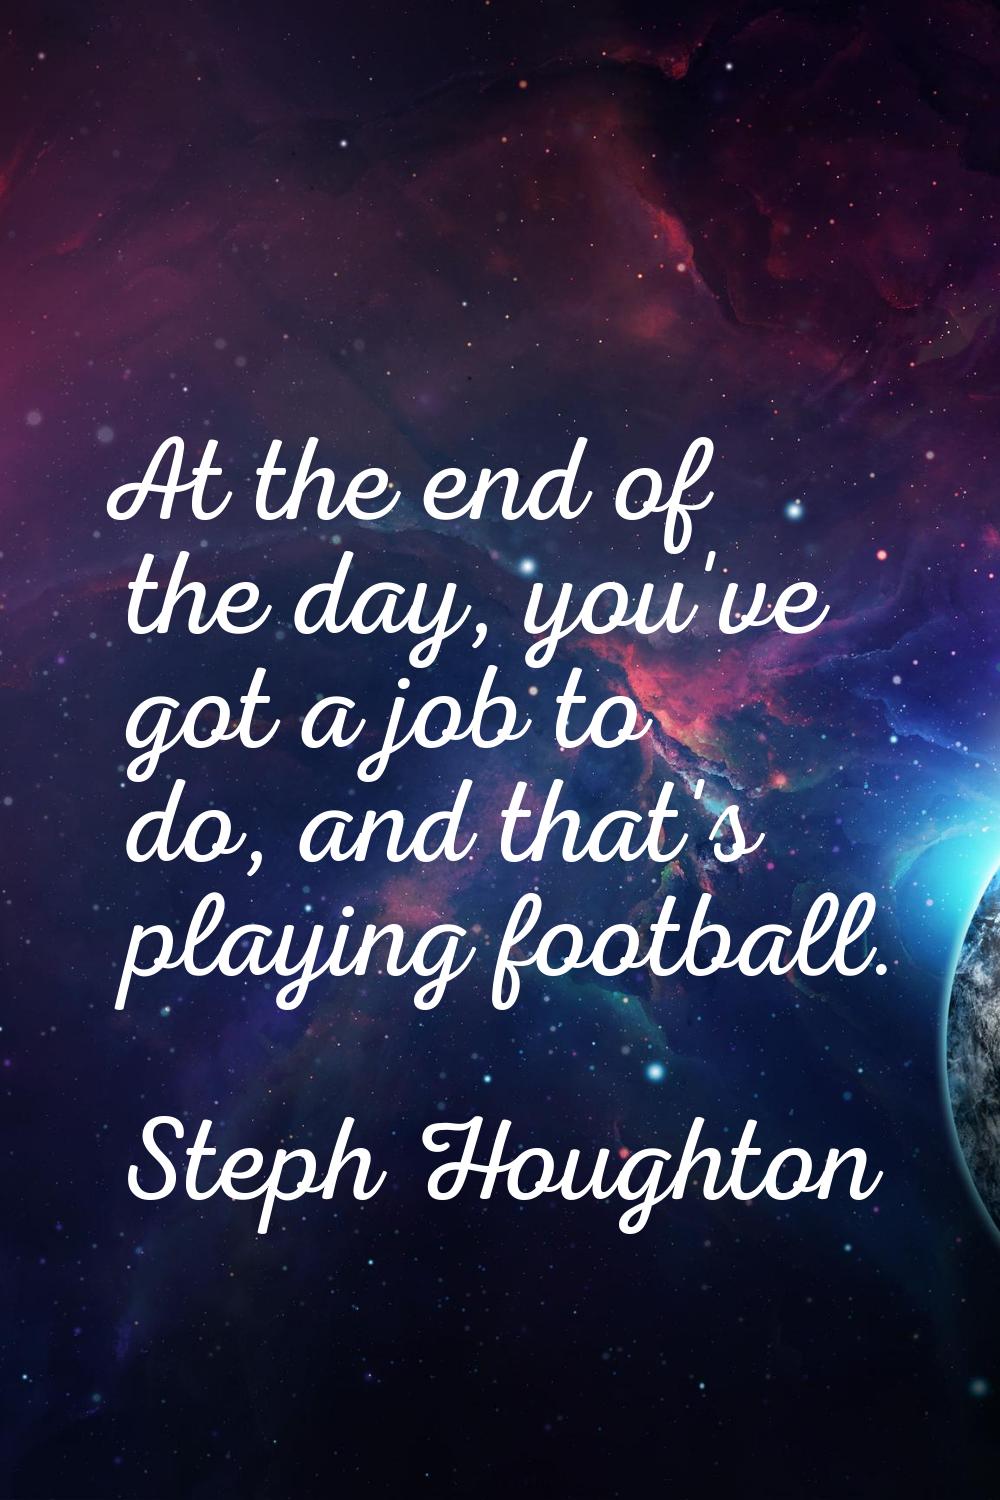 At the end of the day, you've got a job to do, and that's playing football.